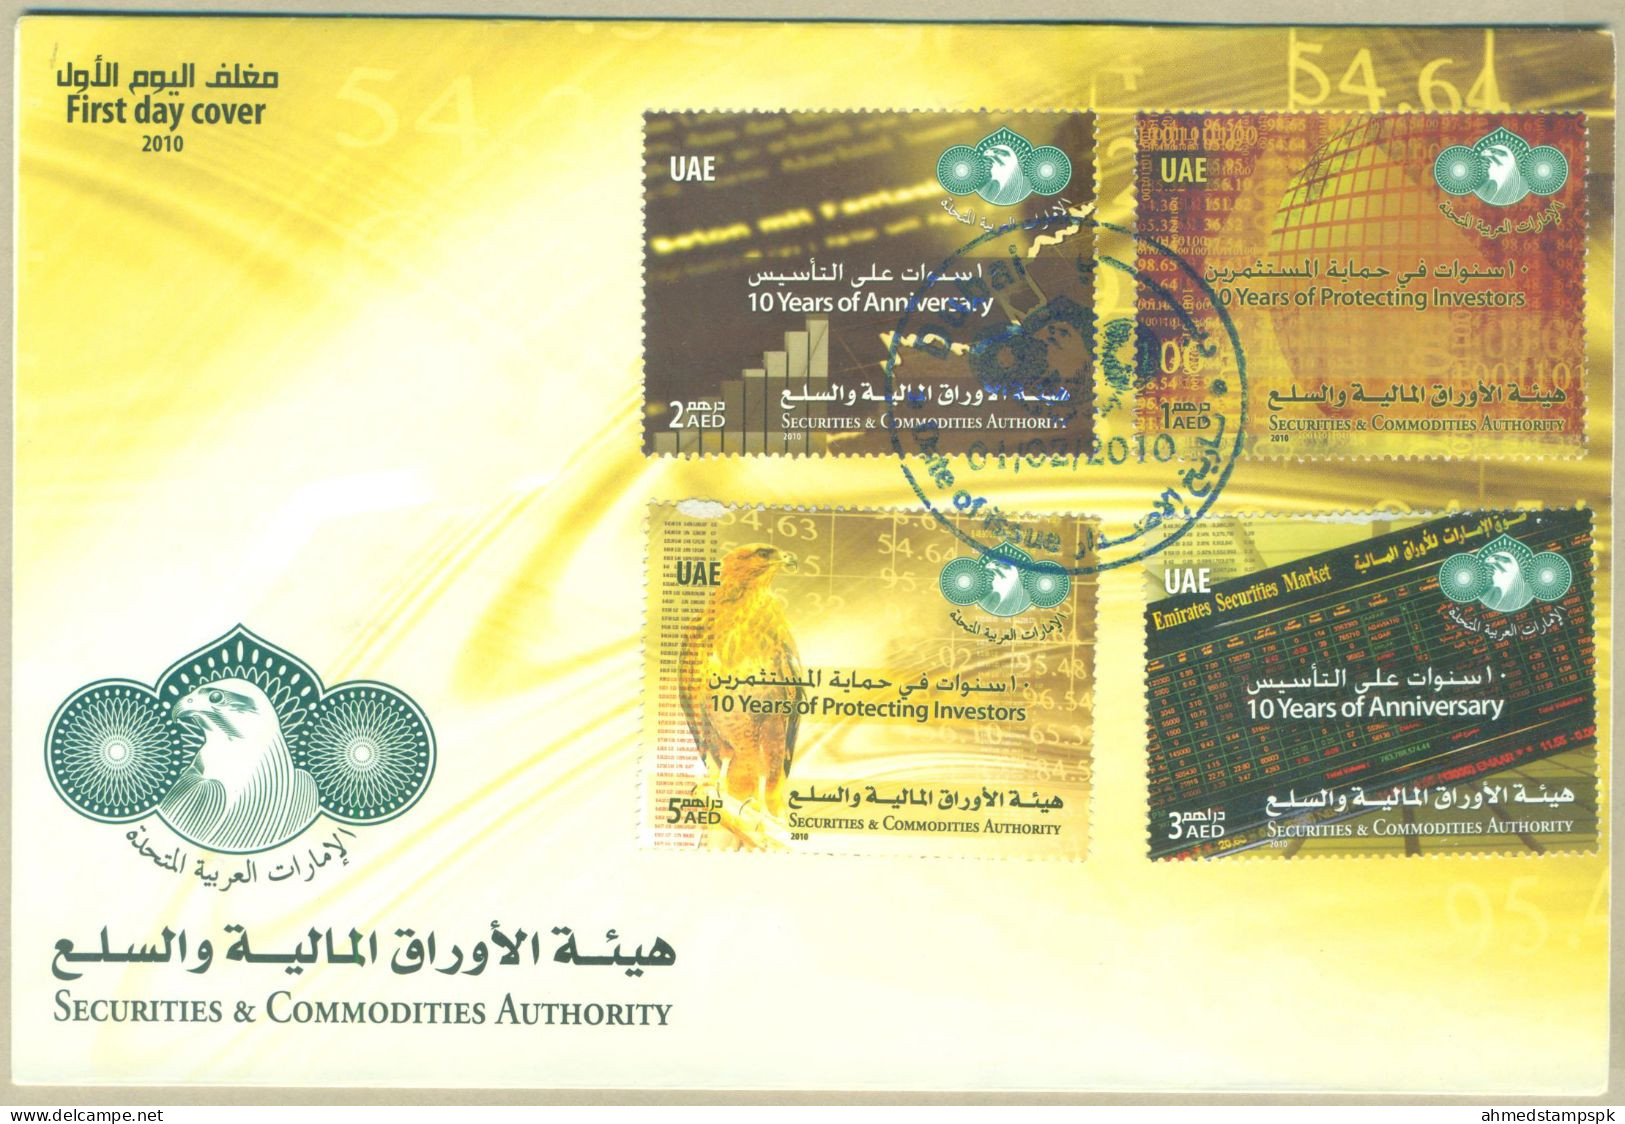 UAE UNITED ARAB EMIRATES FDC FIRST DAY COVER 2010 MNH SECURITIES AND COMMODITIES AUTHORITY - Ver. Arab. Emirate